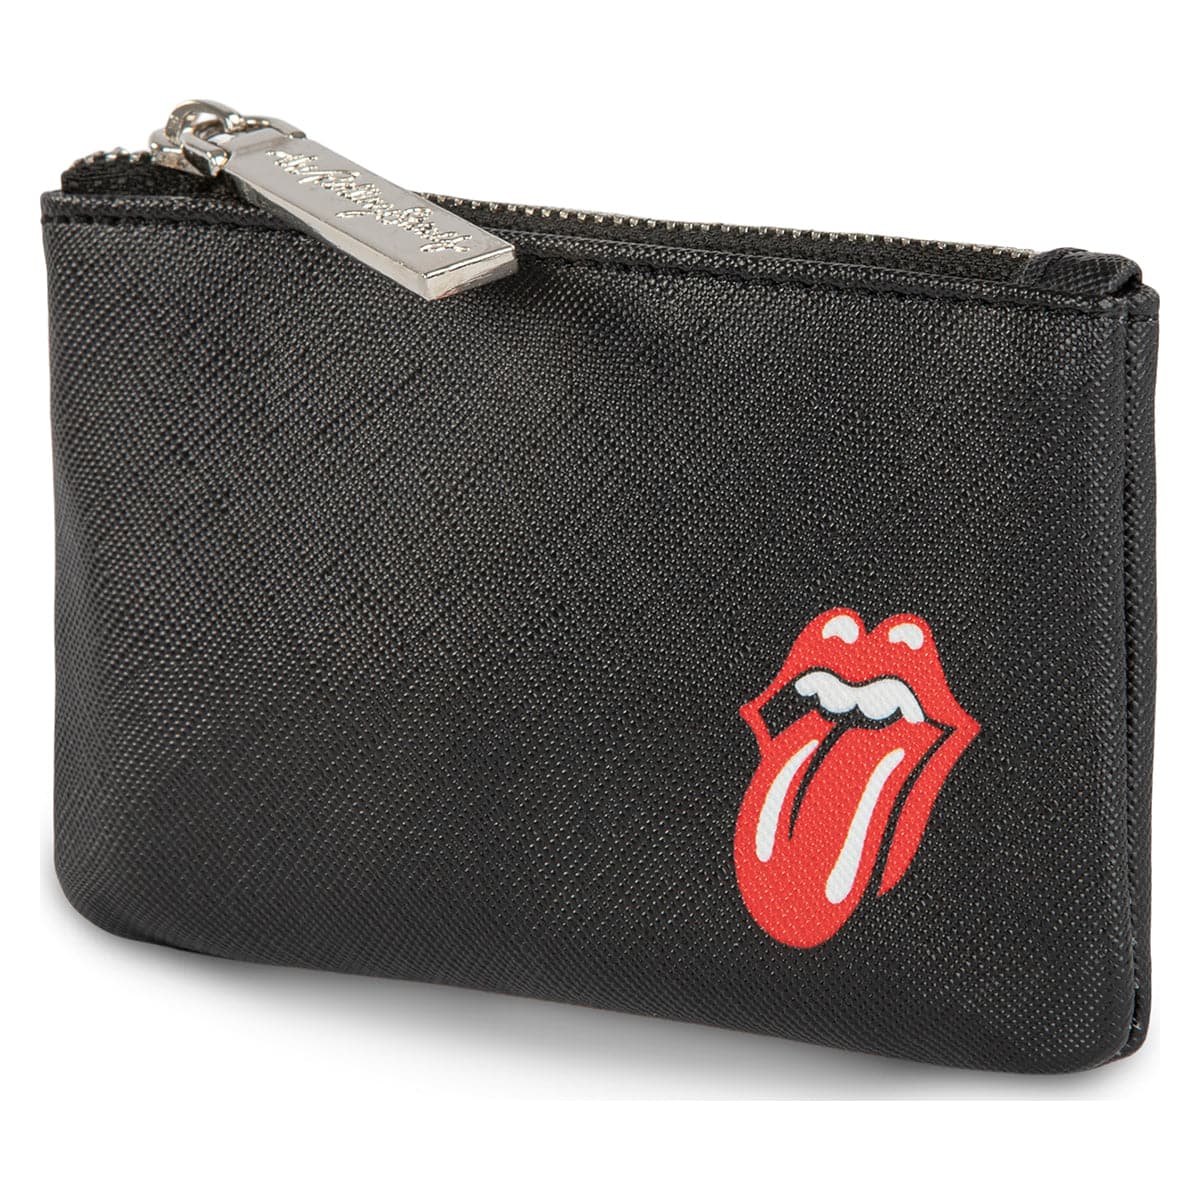 The Rolling Stones The Cult Coin Pouch